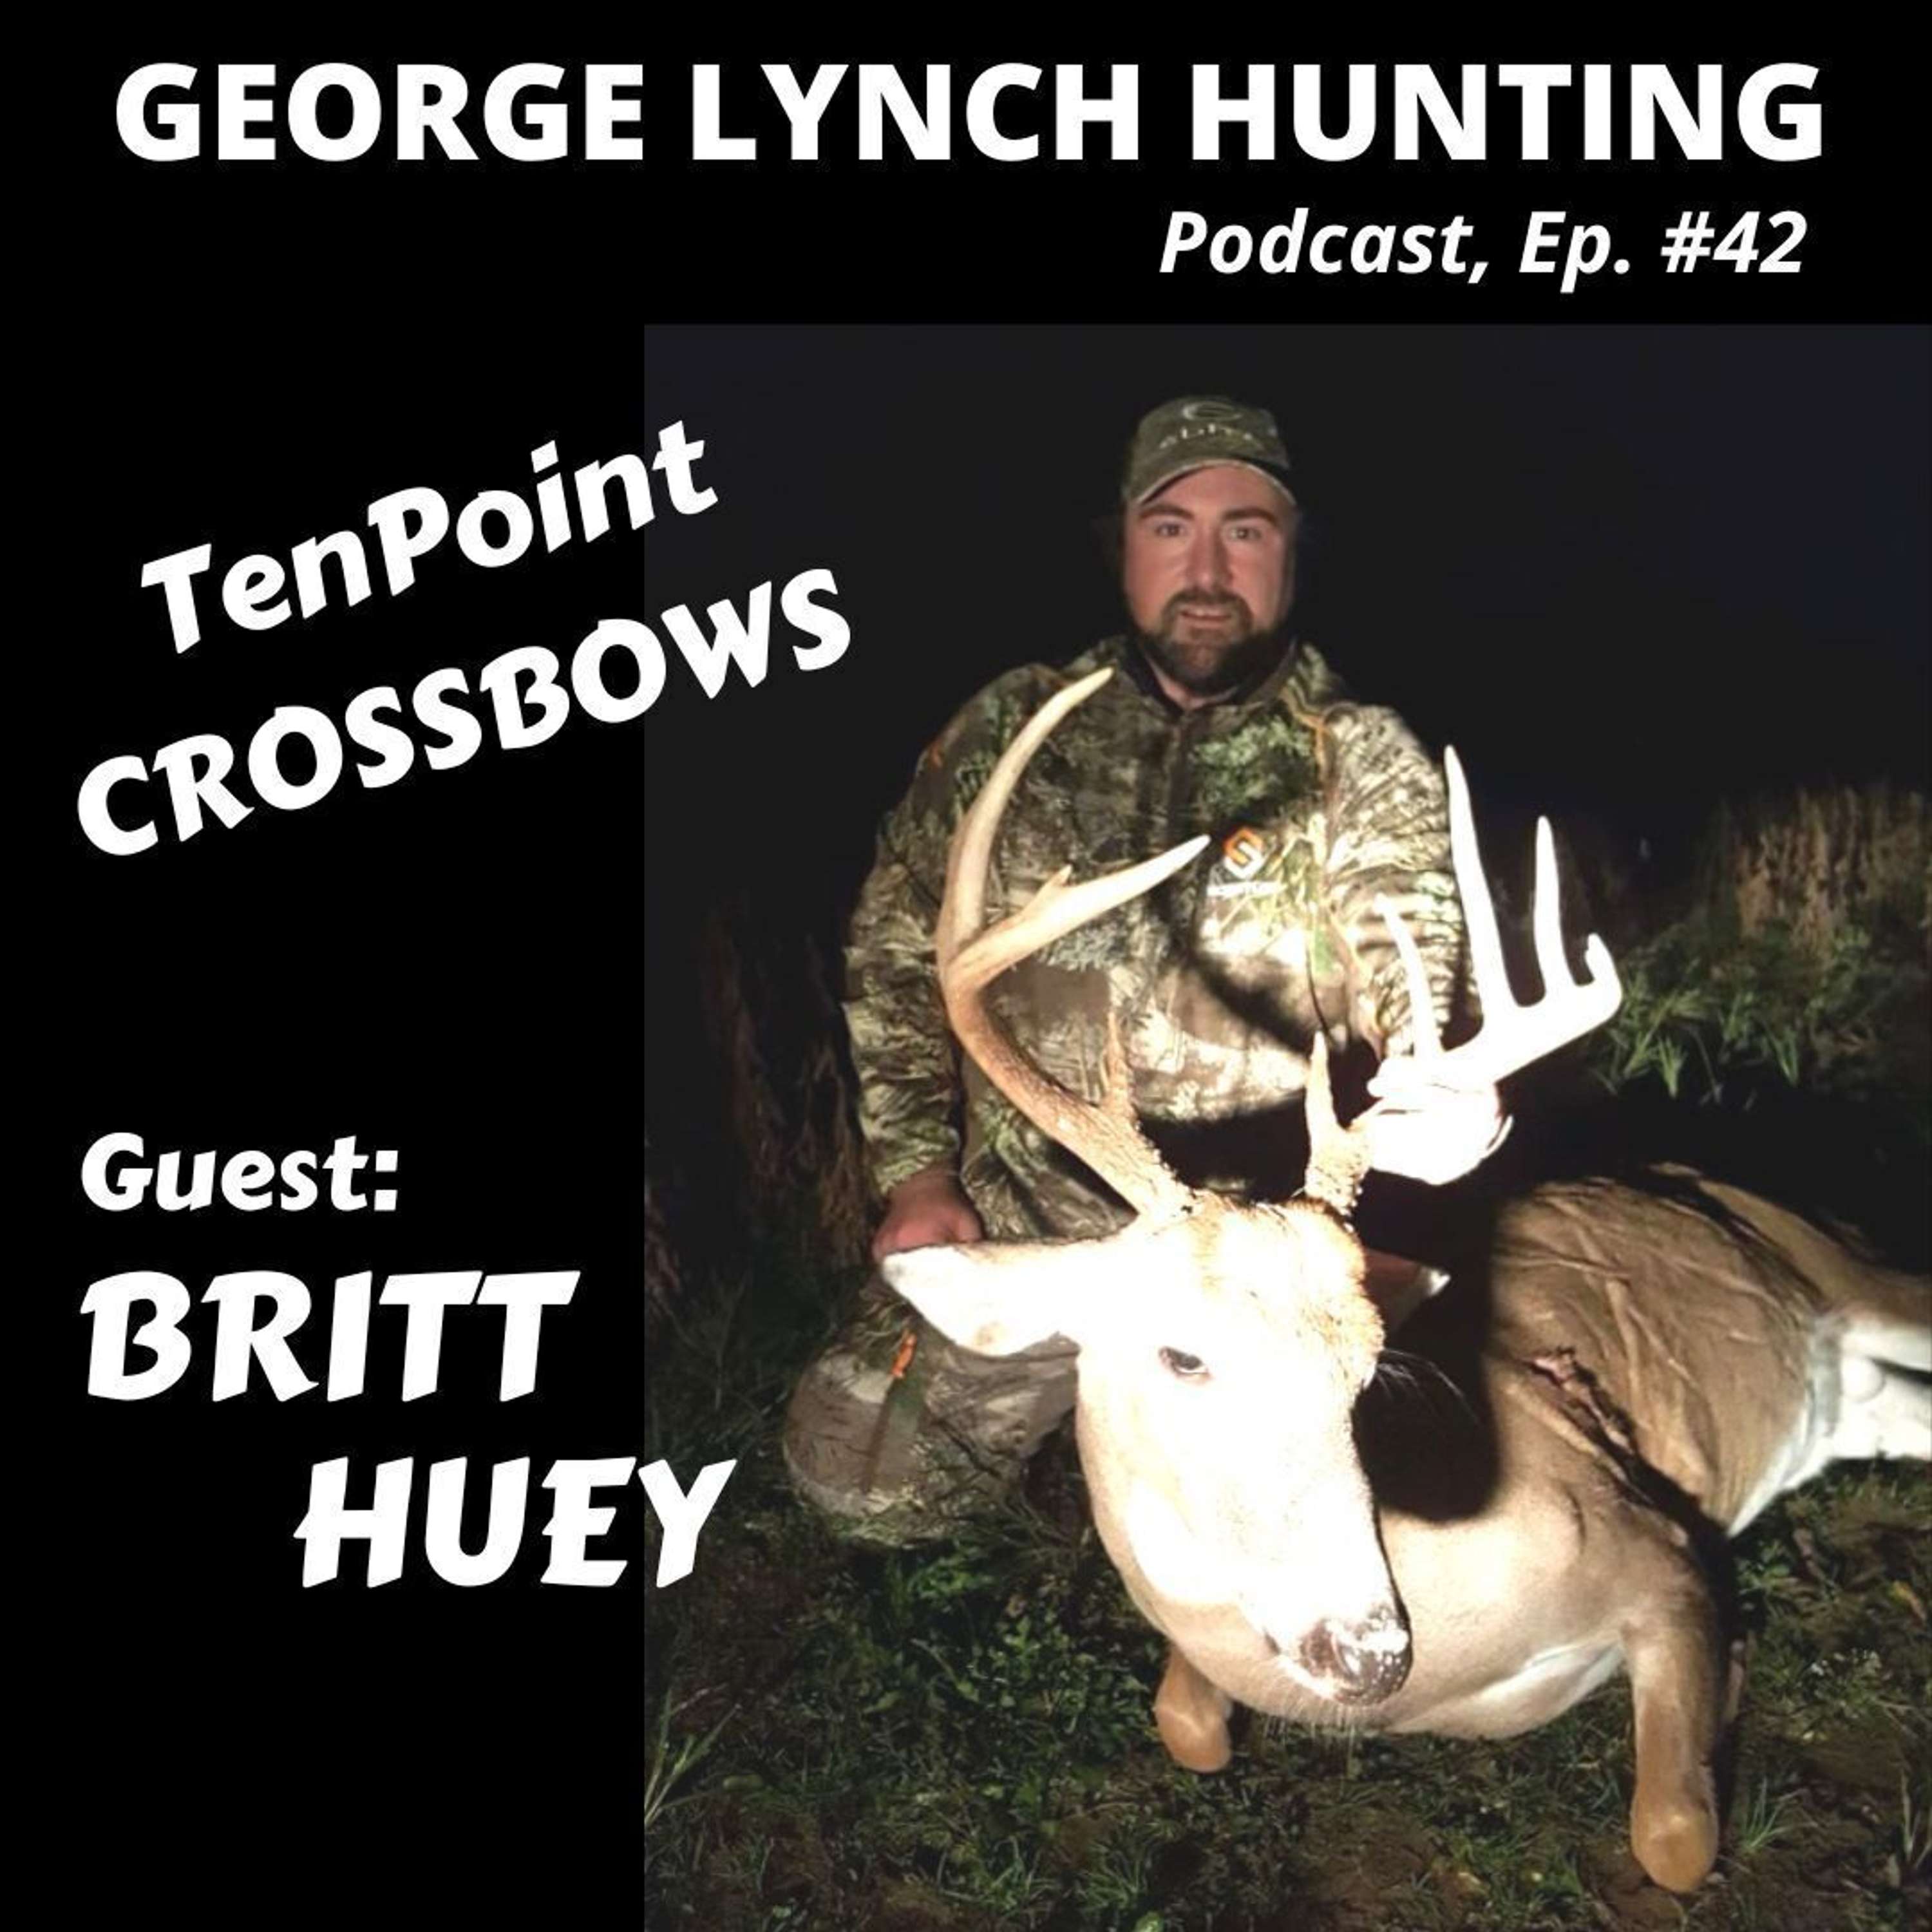 TEN POINT CROSSBOWS discussed and explained by BRITT HUEY